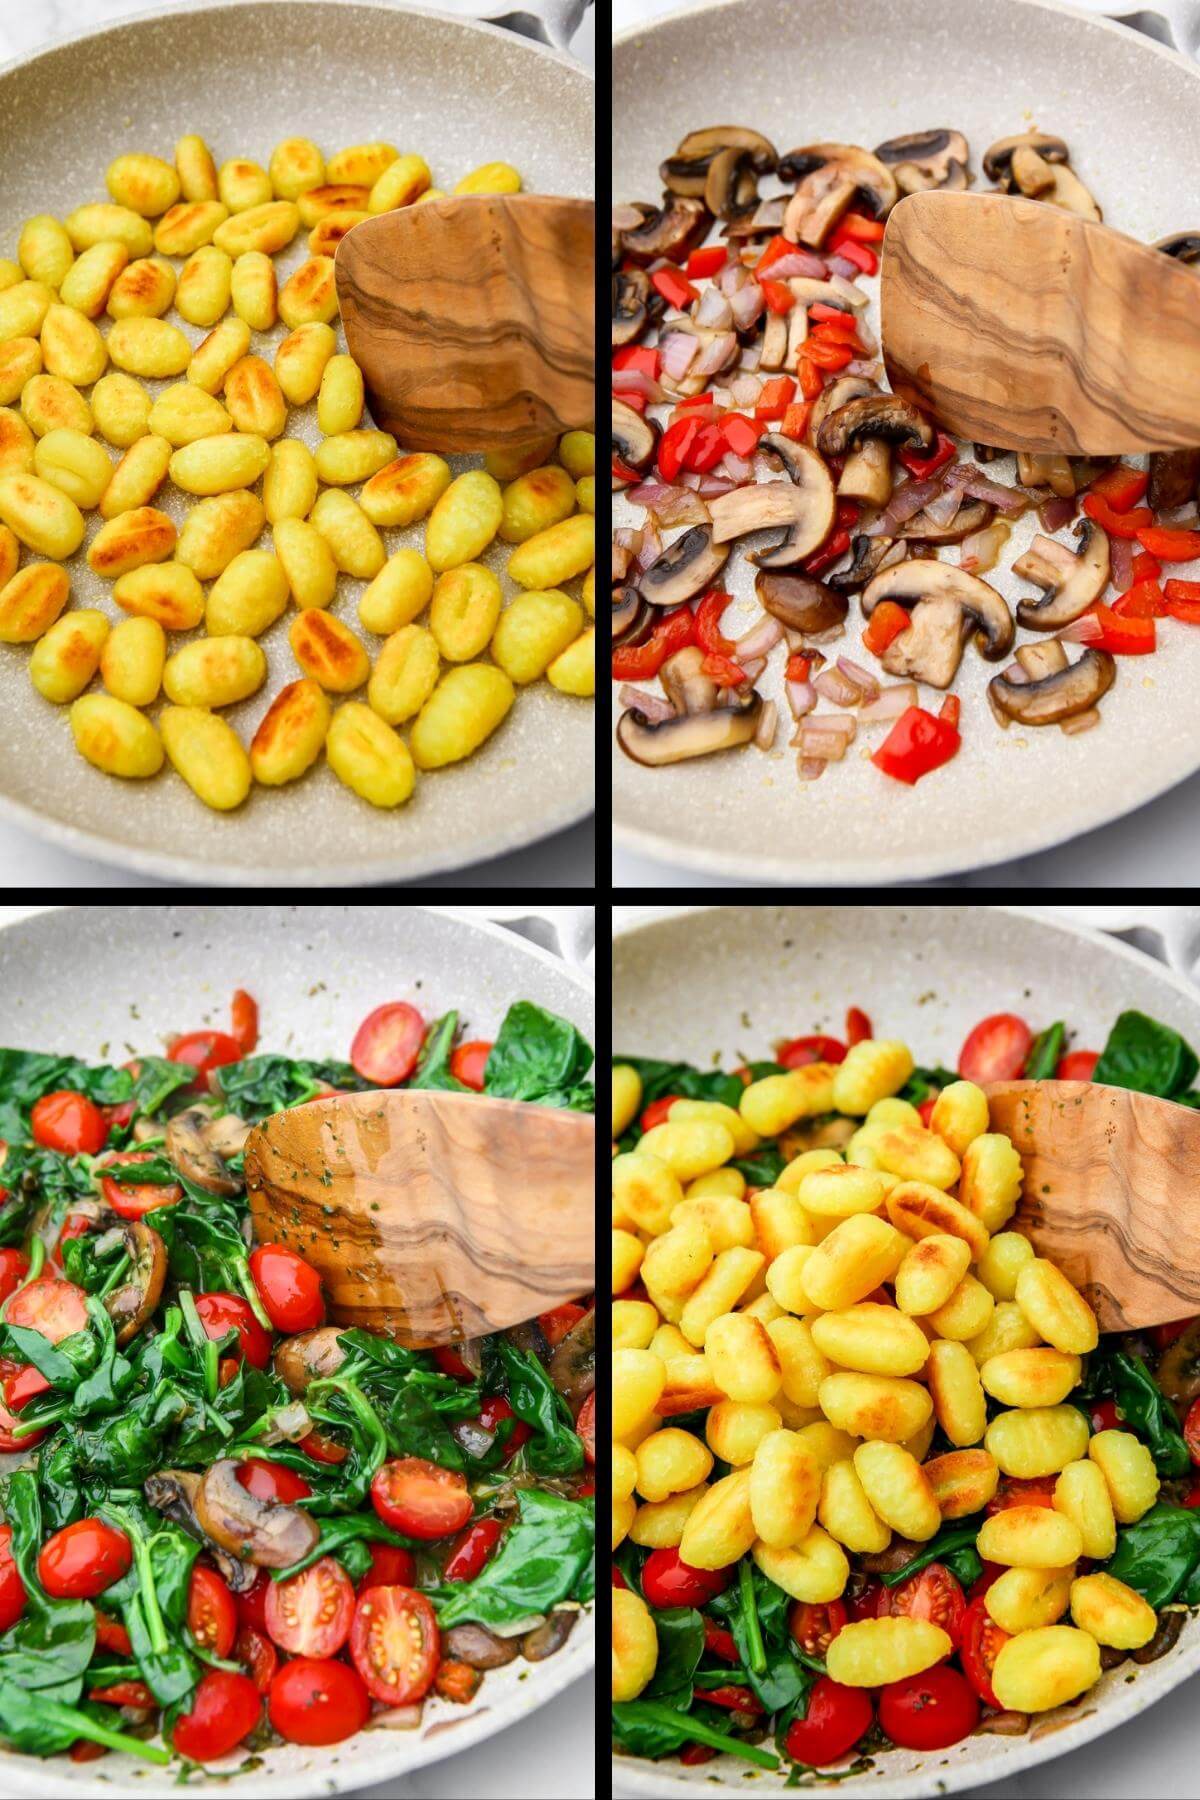 A collage of 4 images showing frying gnocchi and sauteing veggies then adding them together.